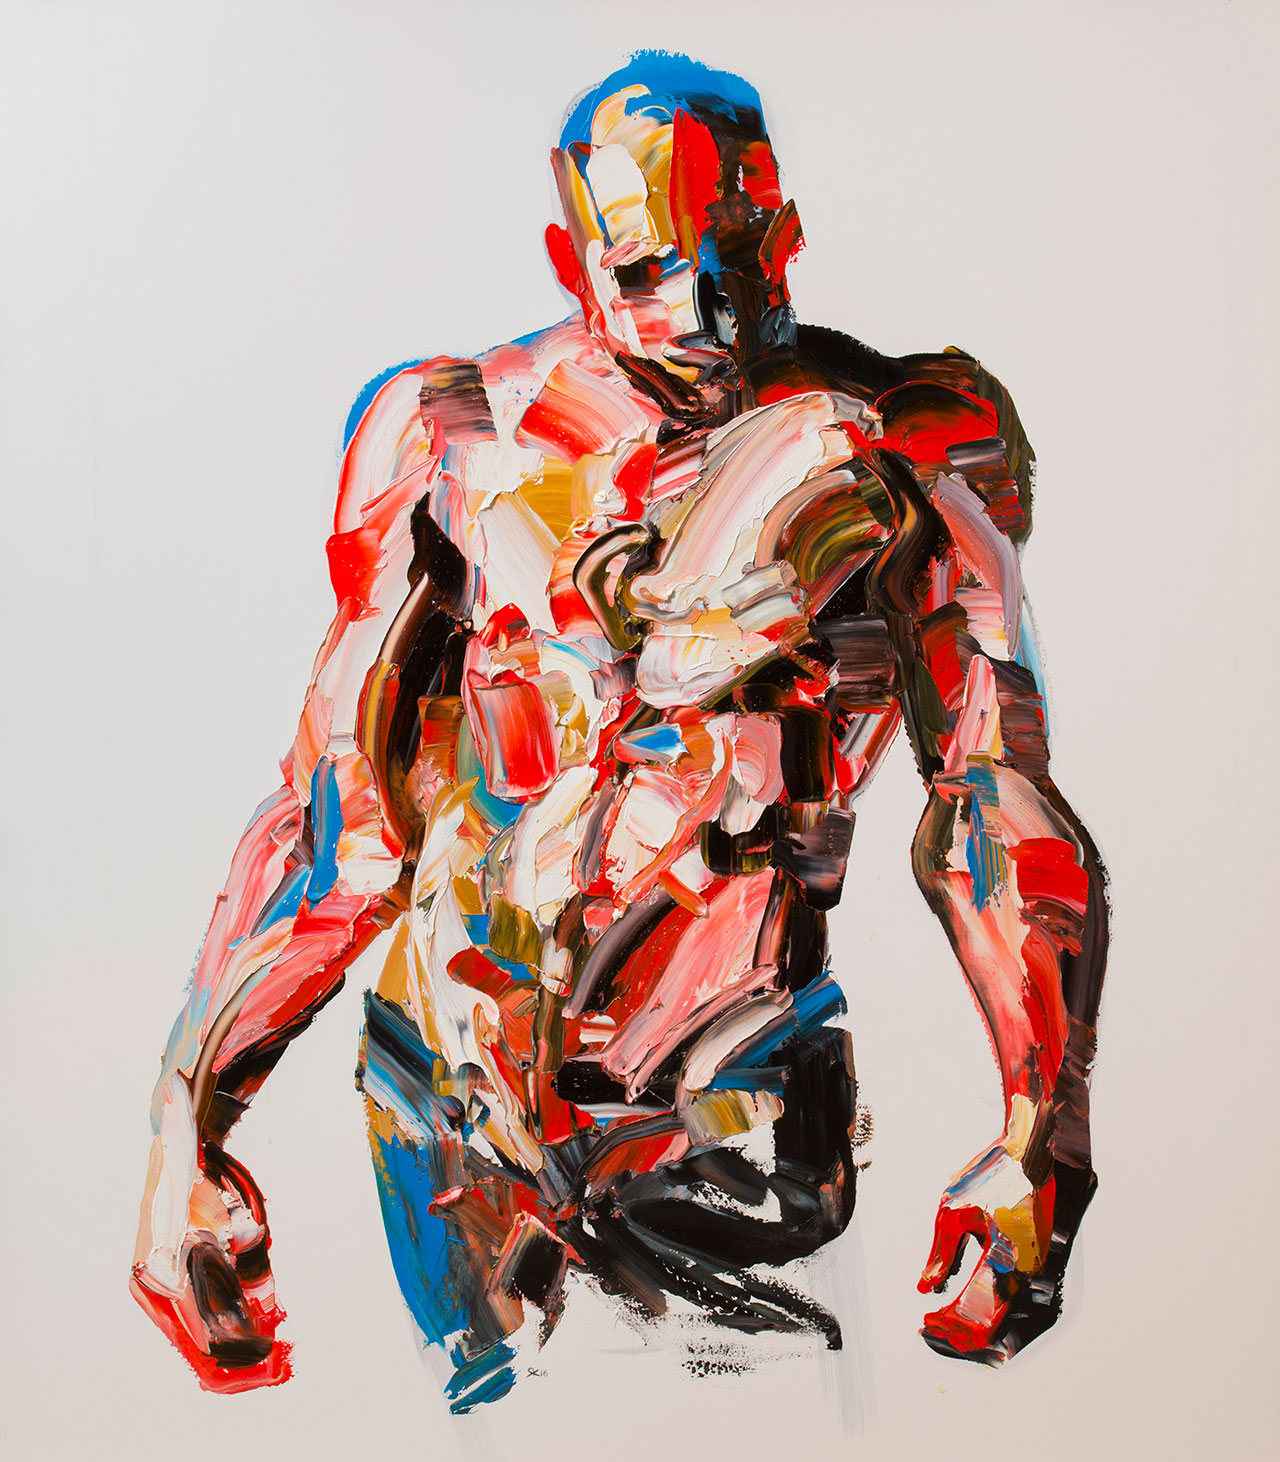 Salman Khoshroo, Figure from the “Wanderer” exhibition,oil on canvas, 140x160cm.